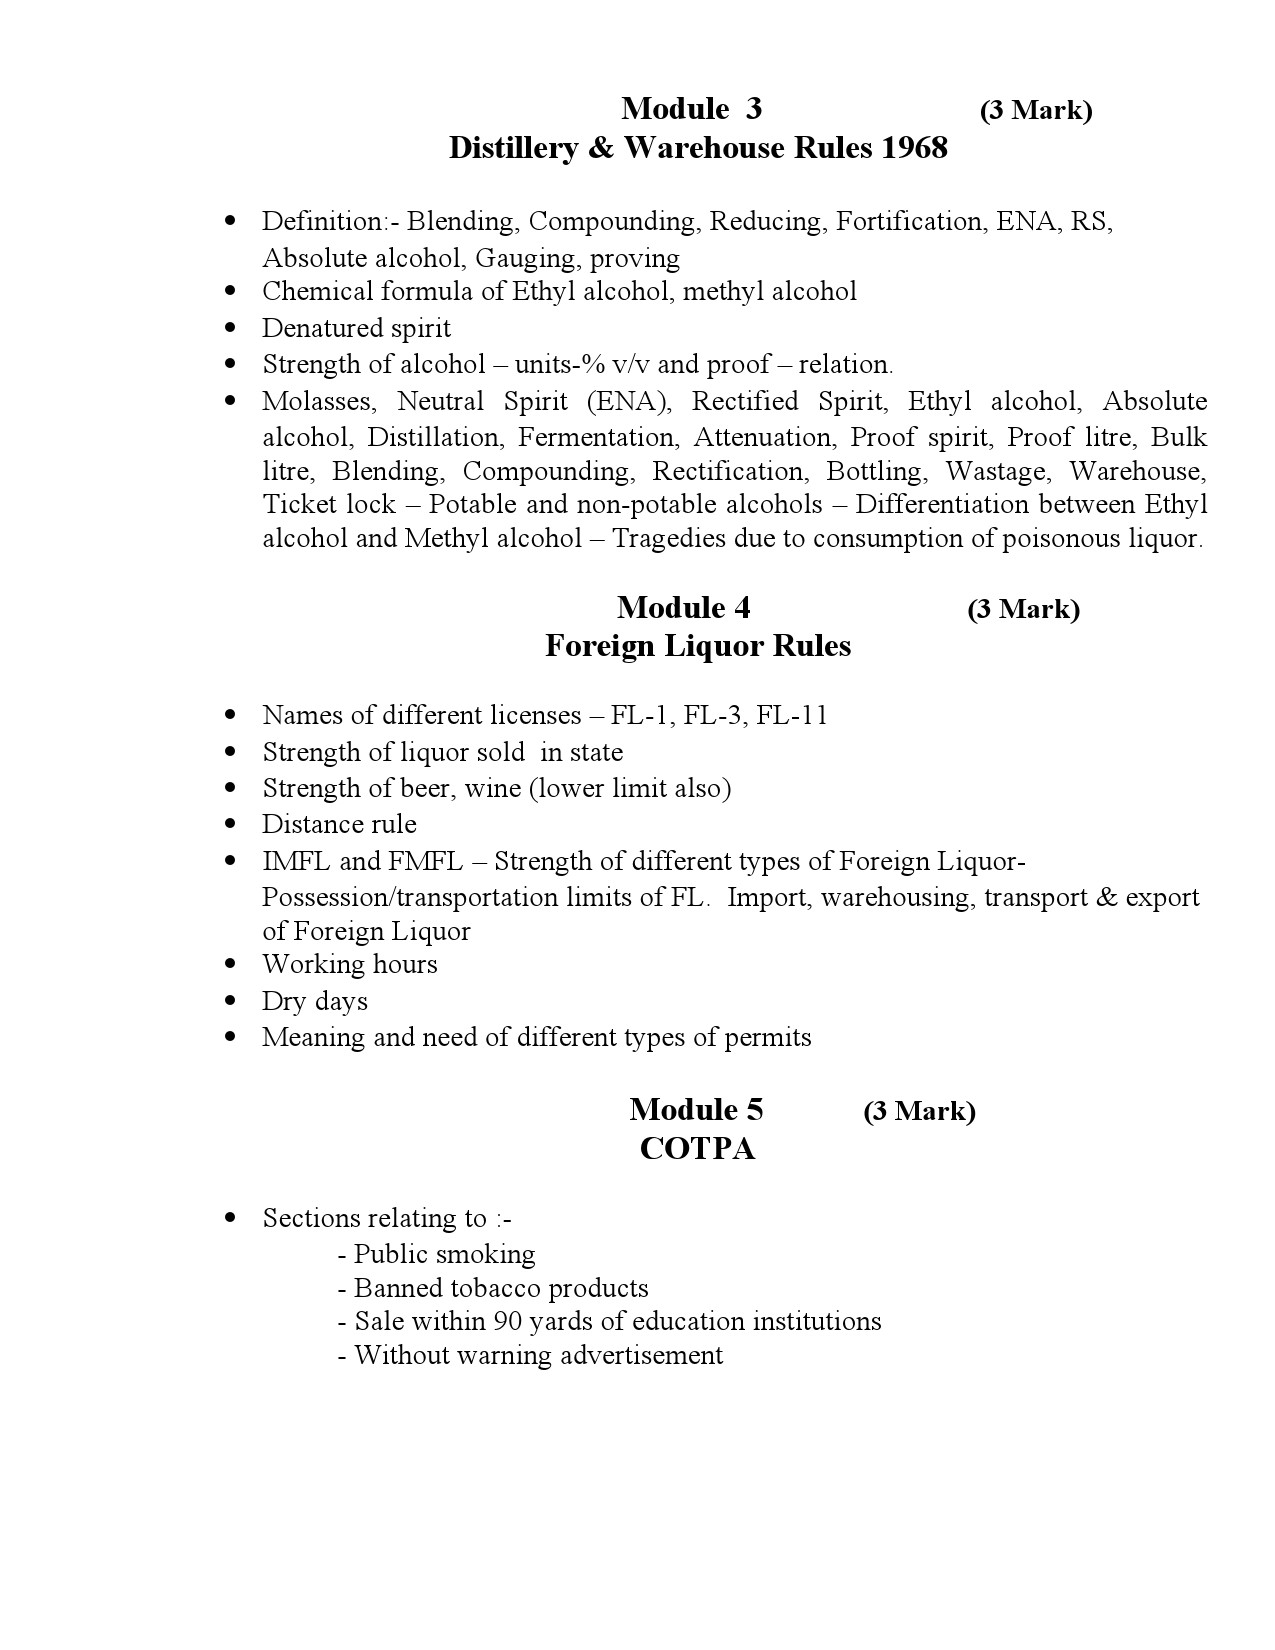 Civil Excise Officer Final Examination Syllabus For Plus Two Level - Notification Image 12